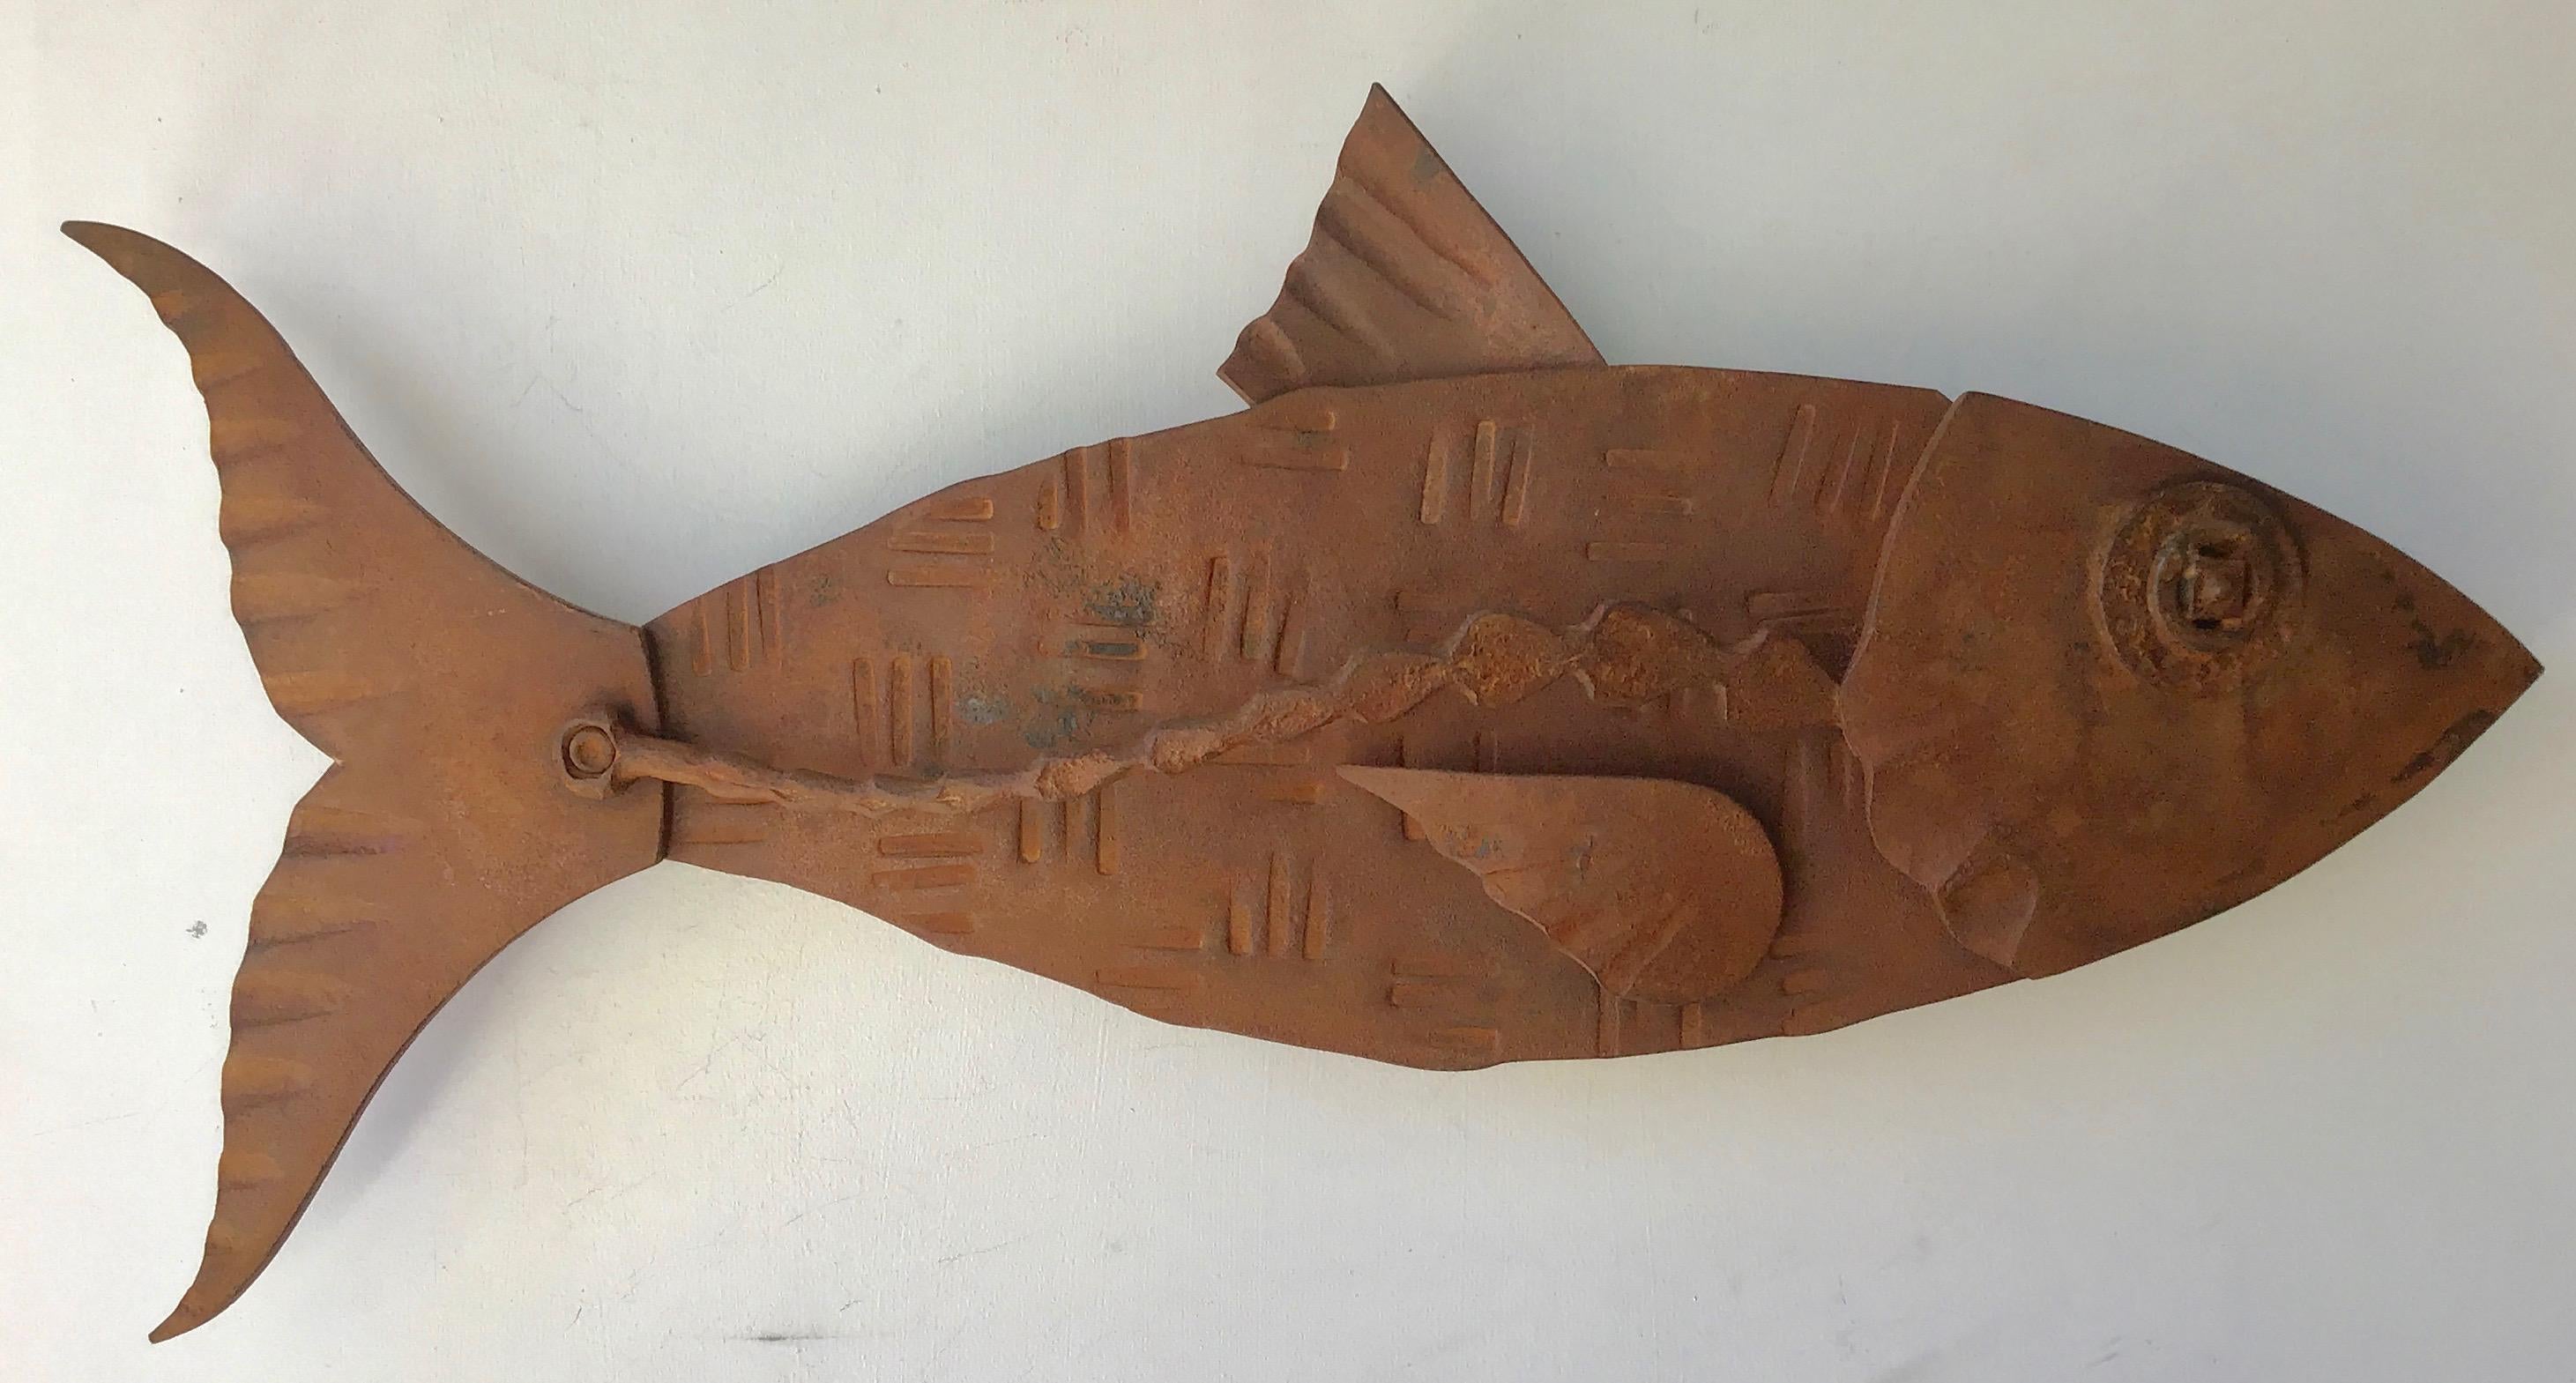 "Alubulidae 5" Hand forged salvaged steel fish wall sculpture